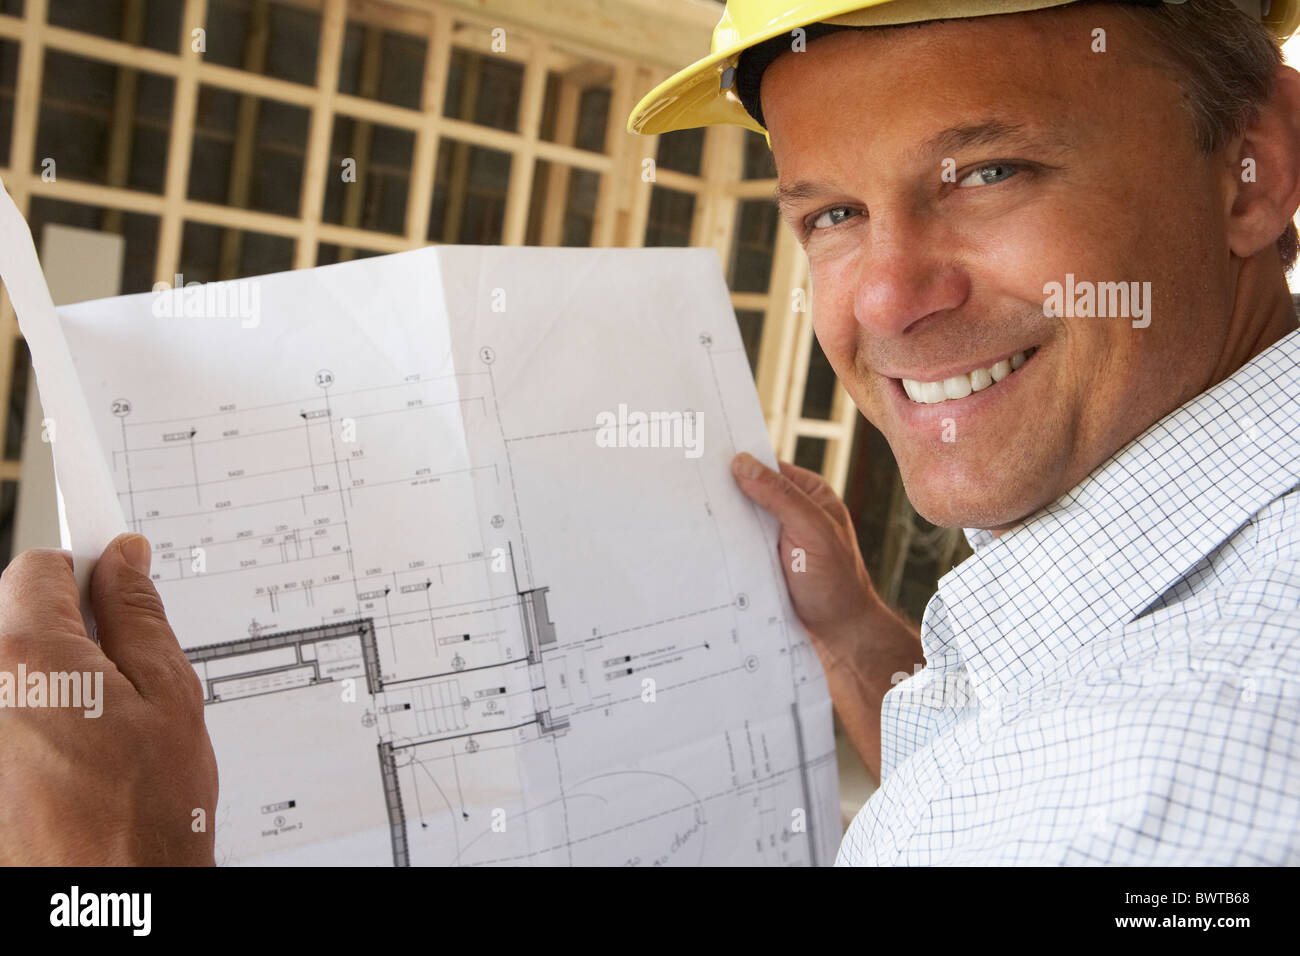 Architect With Plans In New Home Stock Photo